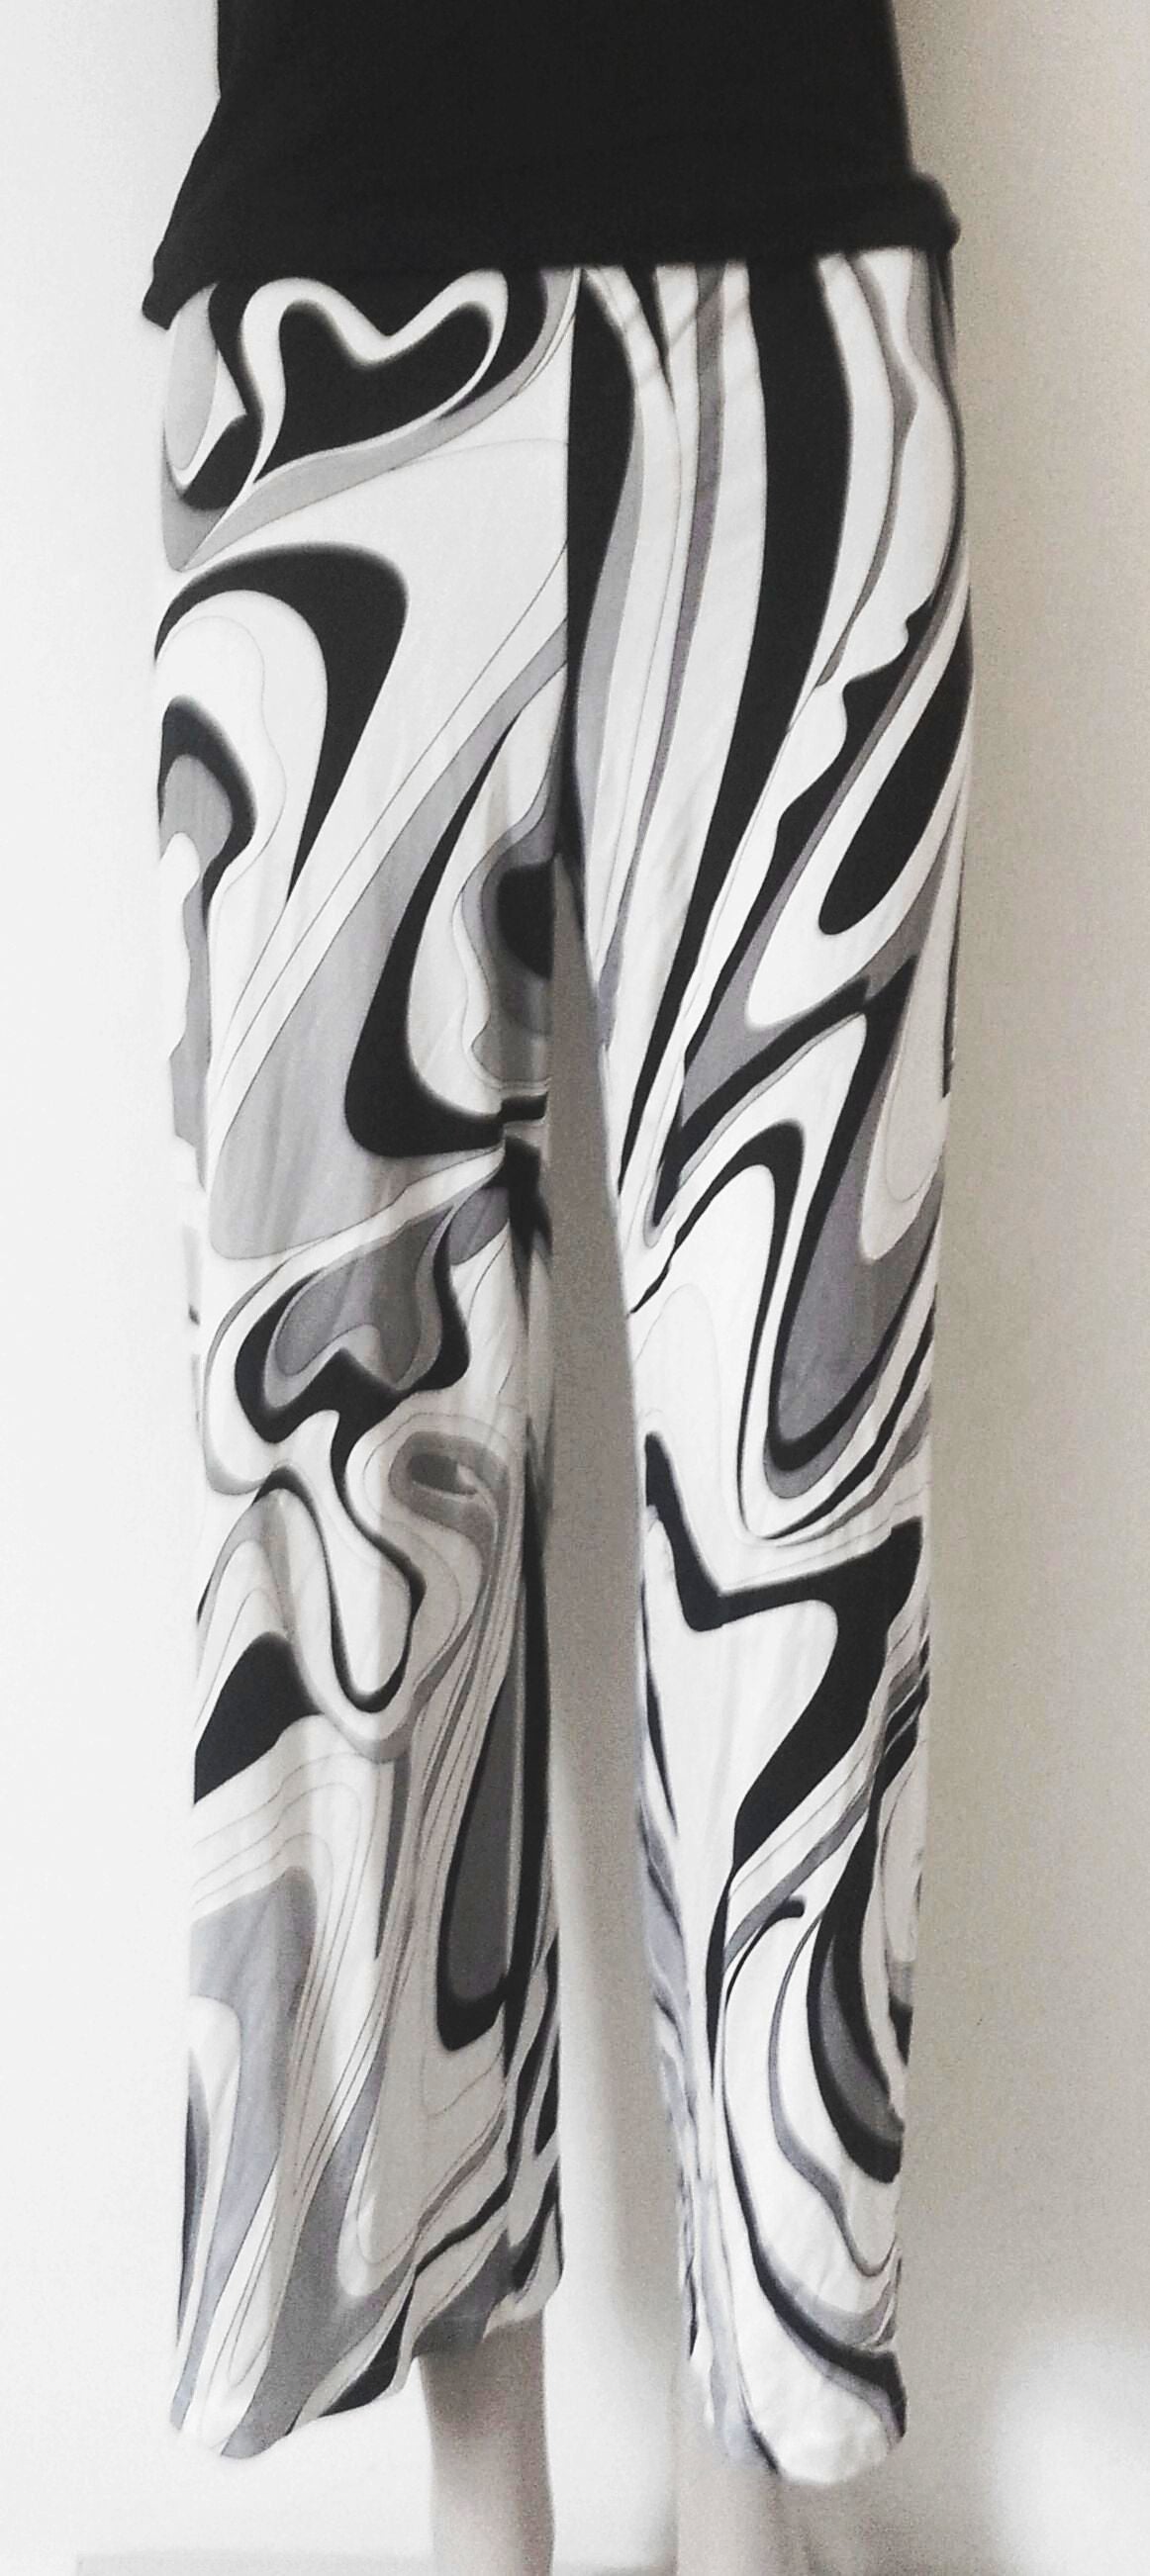 A rare and and fabulous pair of late 60s or early 70s Emilio Pucci Palazzo Pants in a much sought-after monochrome print. (The original label was lost and was replaced by a modern label in the Pucci flagship boutique in London.)

Made from 100%